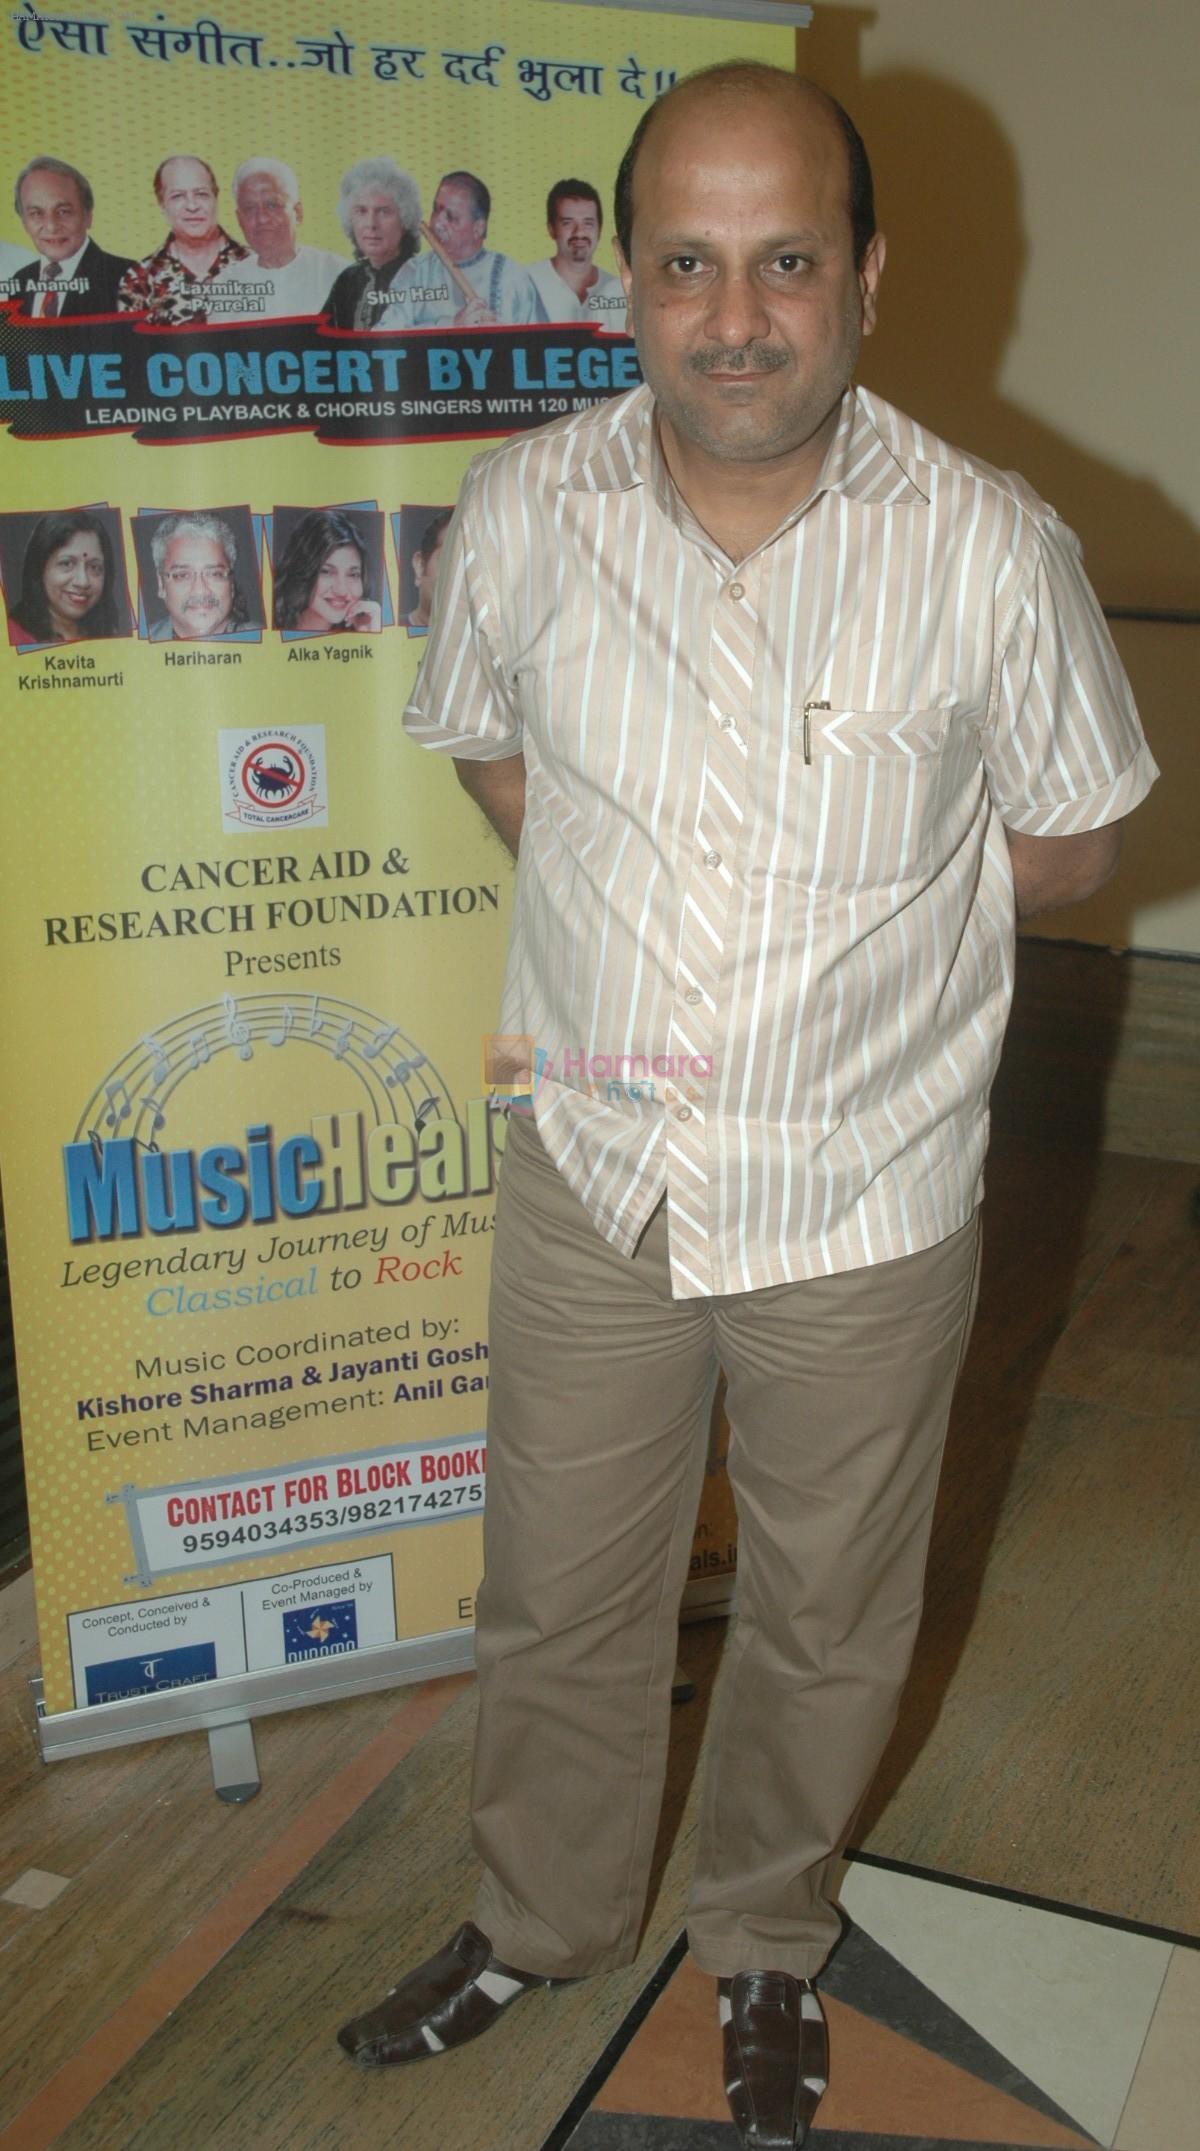 Anil Garg at the rehearsals for the Cancer Aid & Research Foundation's Music Heals 2011 with 100 live musicians under the Music Batonship of Jayanti Gosher & Kishore Sharma on 9th Nov 2011